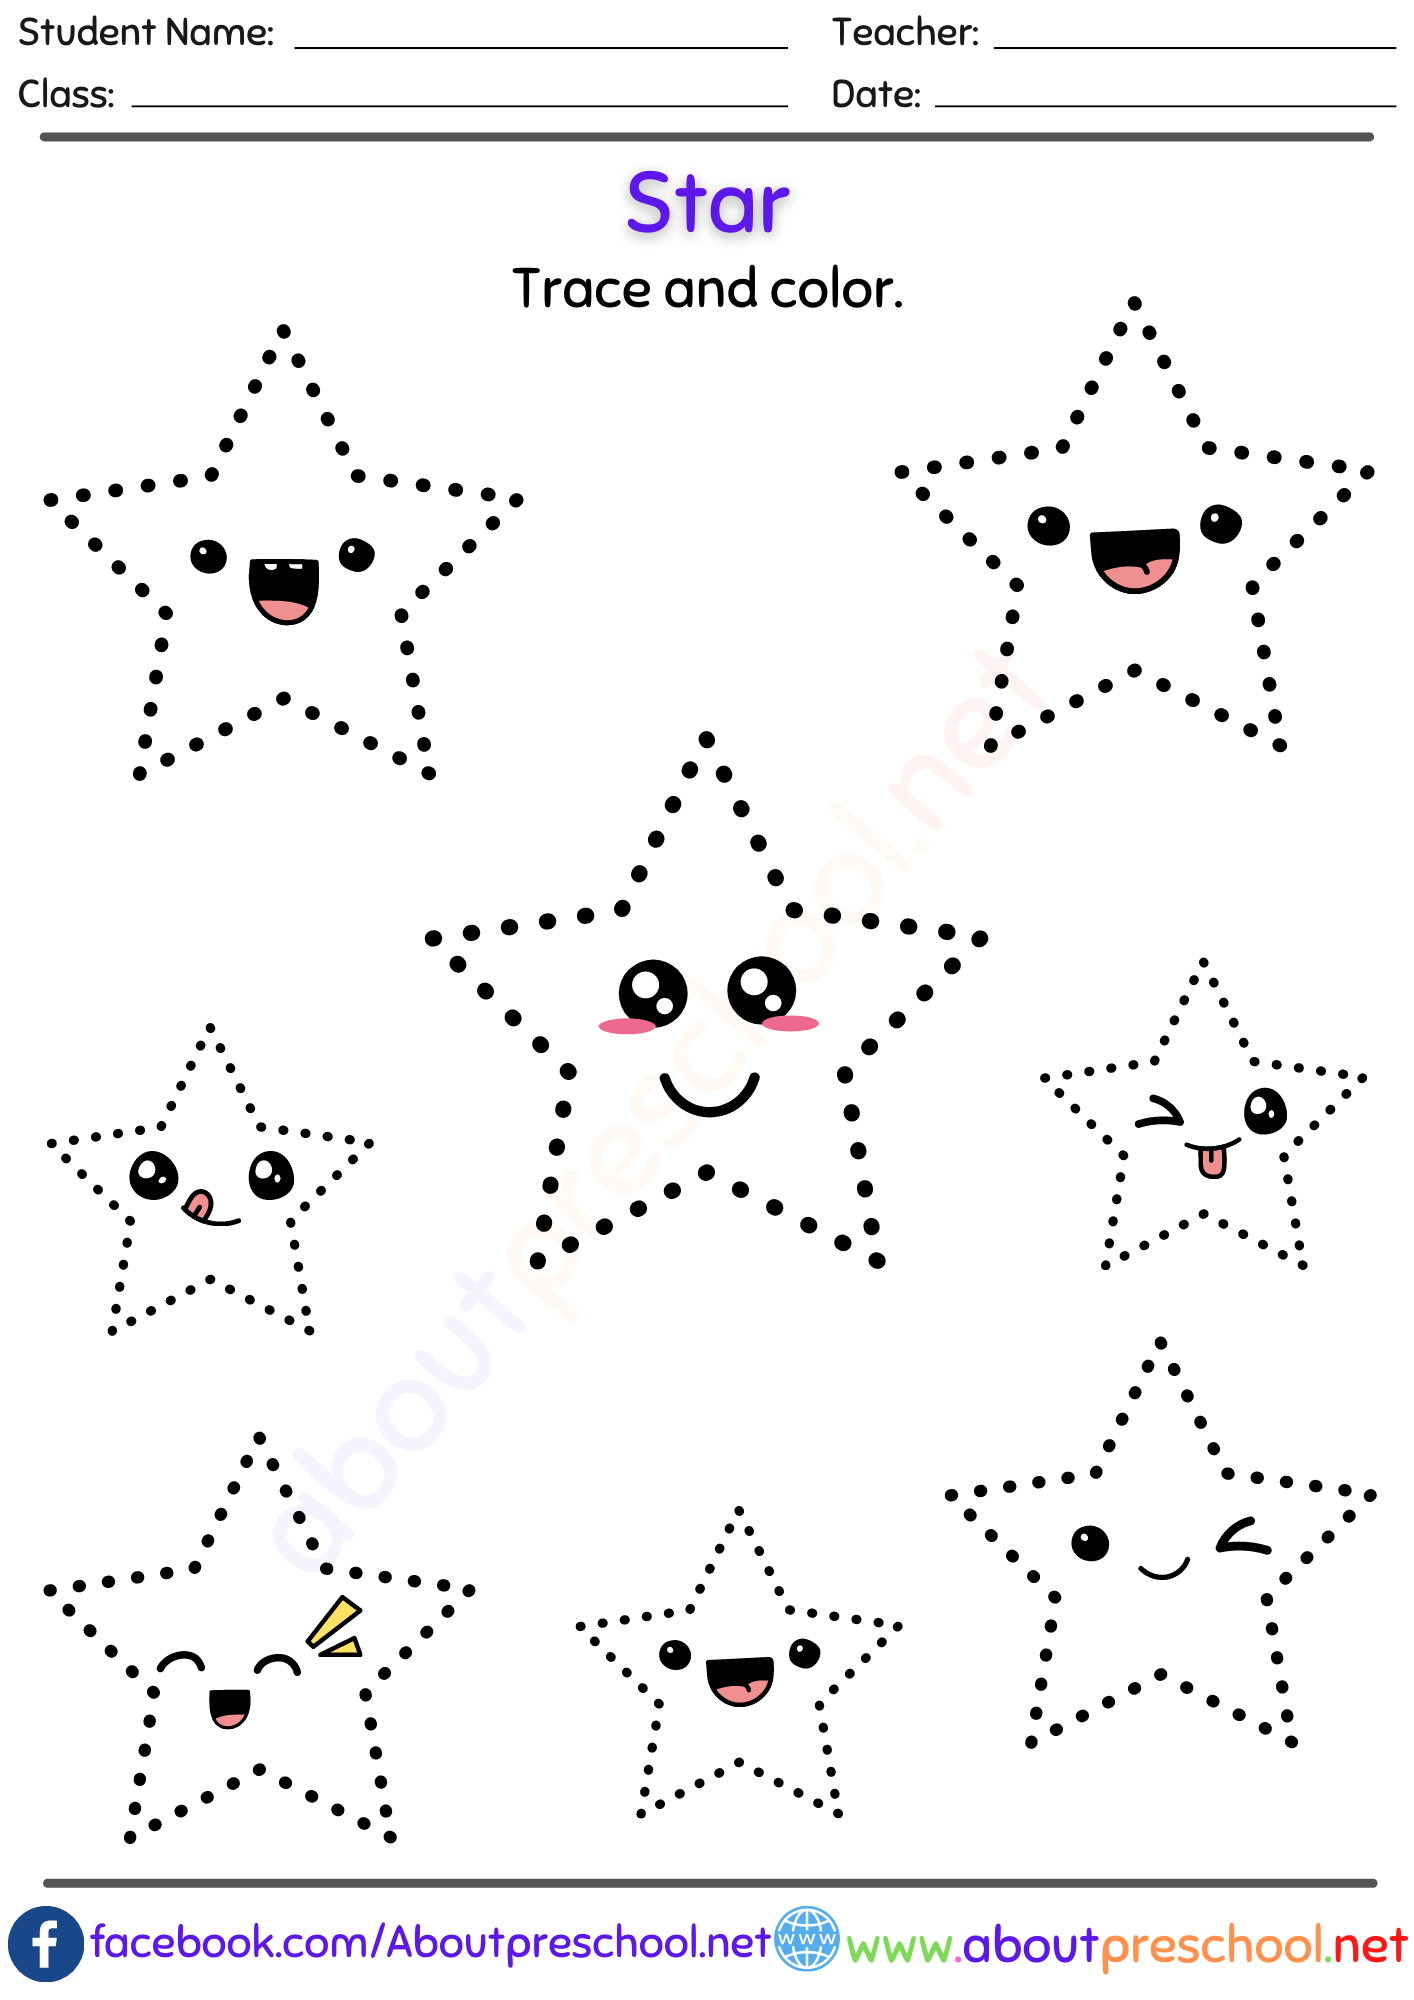 Shapes trace and color worksheet Star